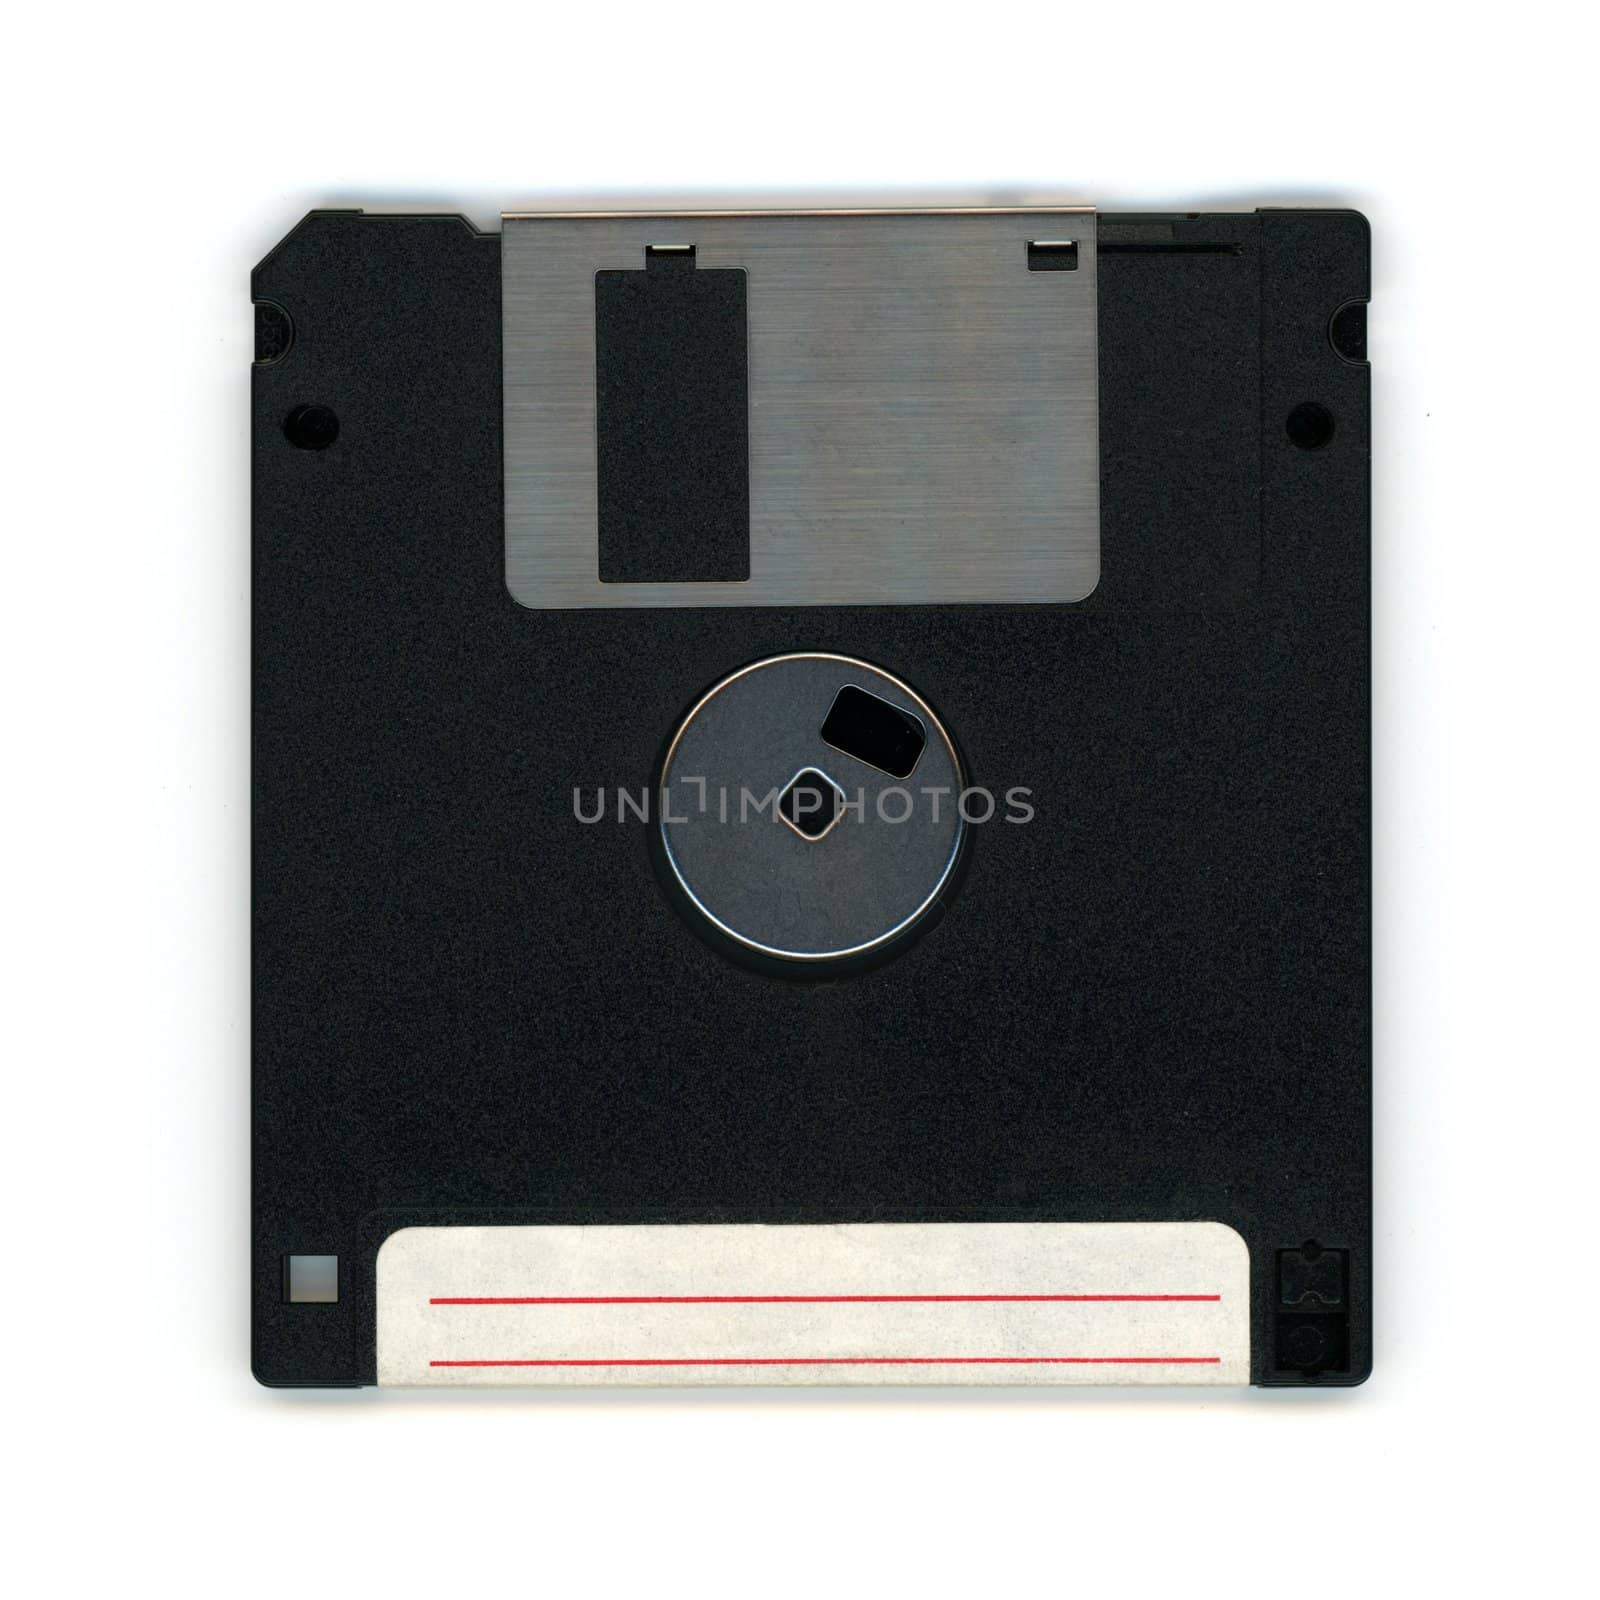 floppy disc for PC, back side by claudiodivizia